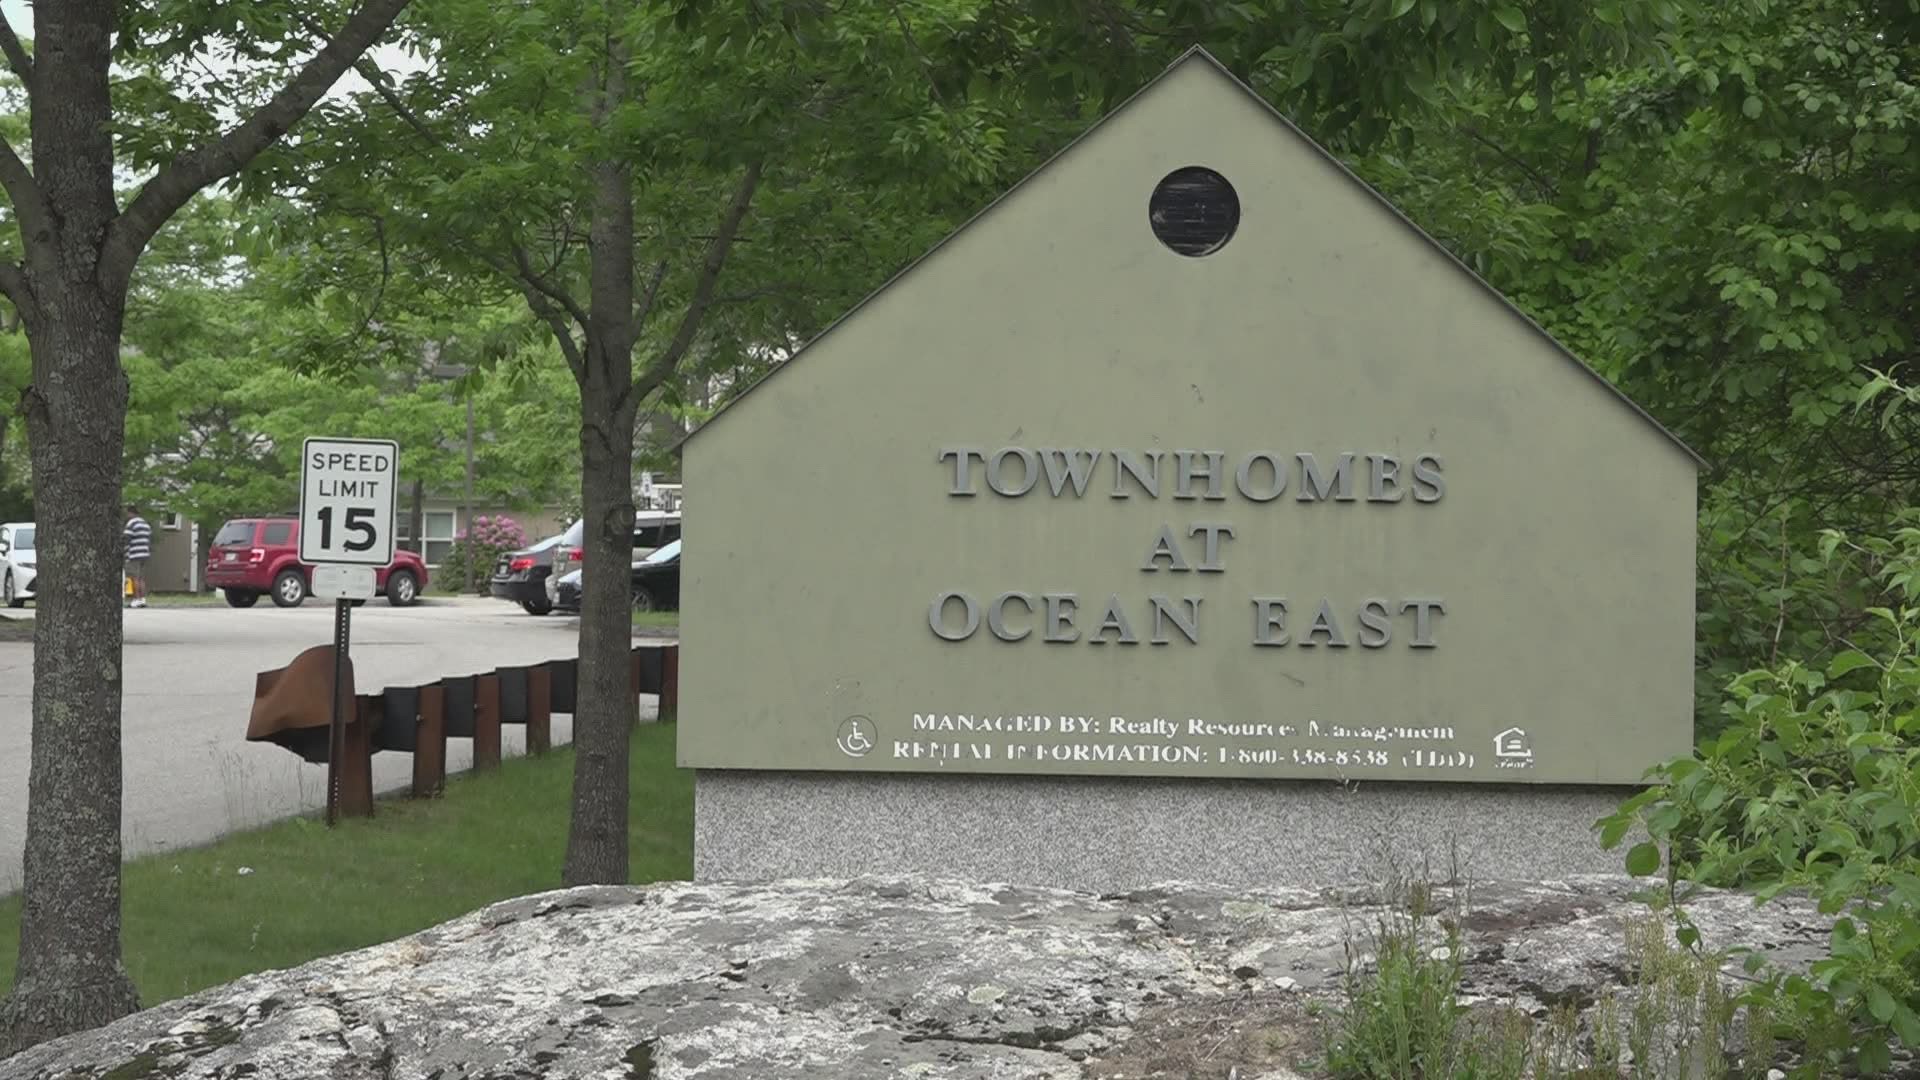 Callers reported several shots being fired around 11 PM at the Ocean East Townhomes apartment complex.